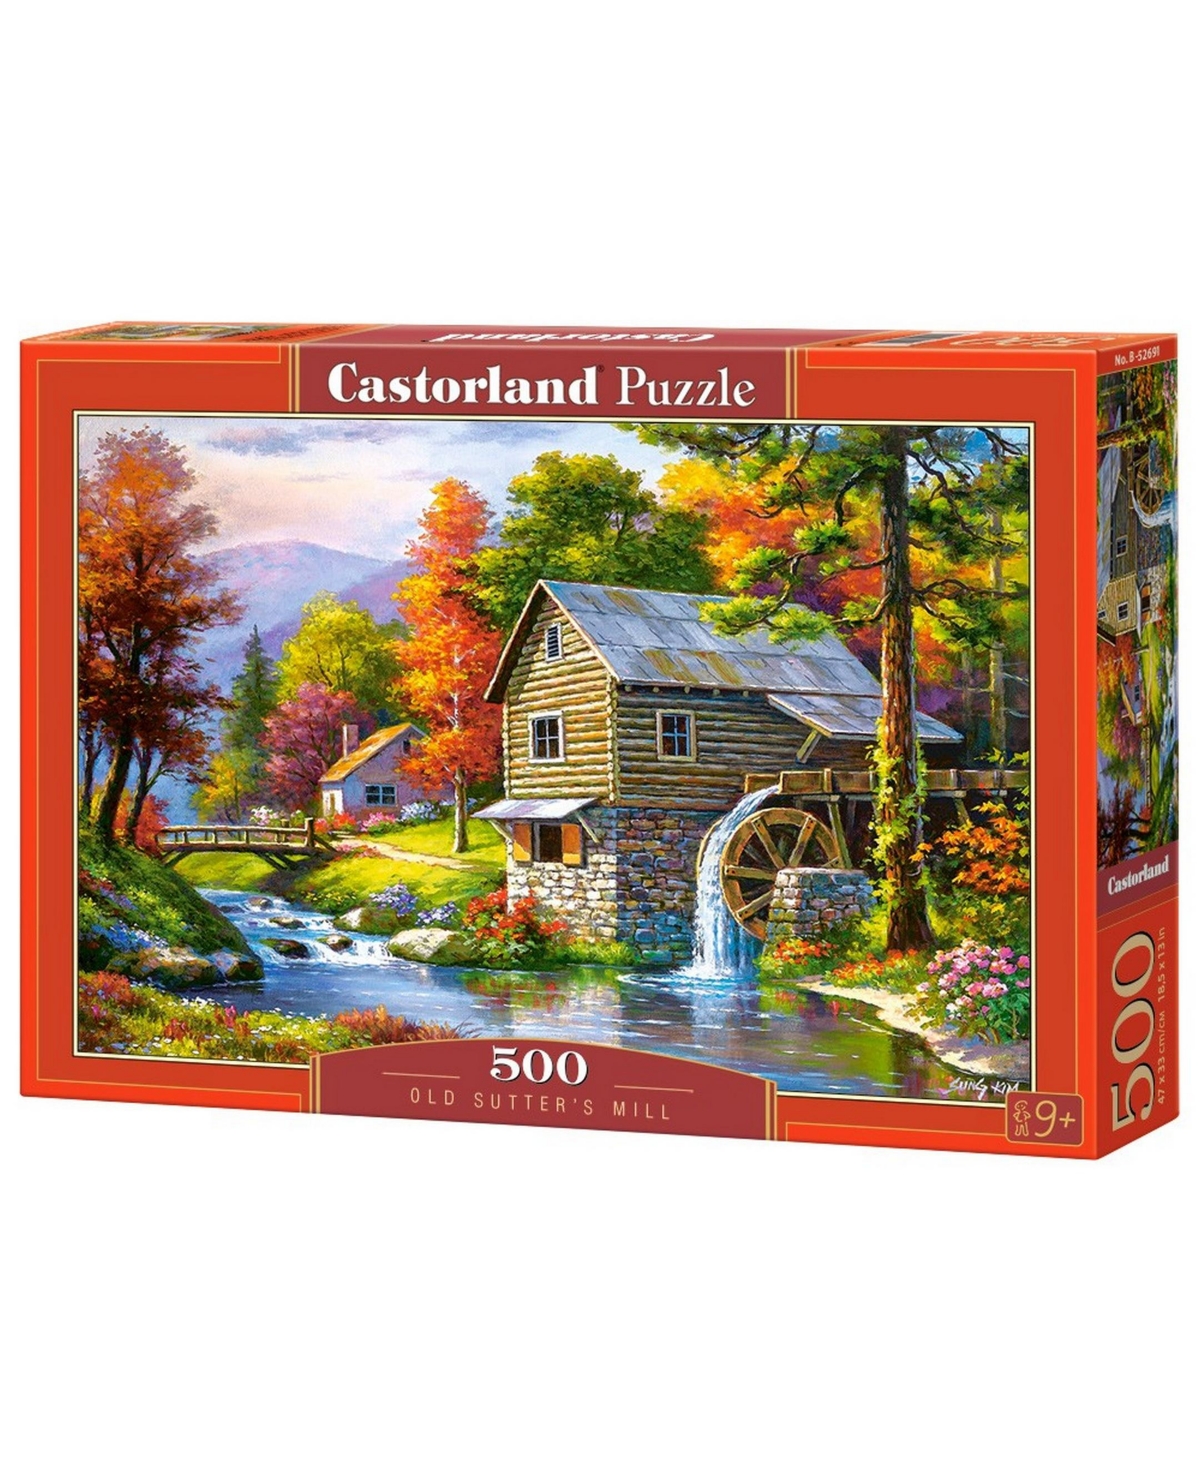 Castorland Old Sutter's Mill Jigsaw Puzzle Set, 500 Piece In Multicolor